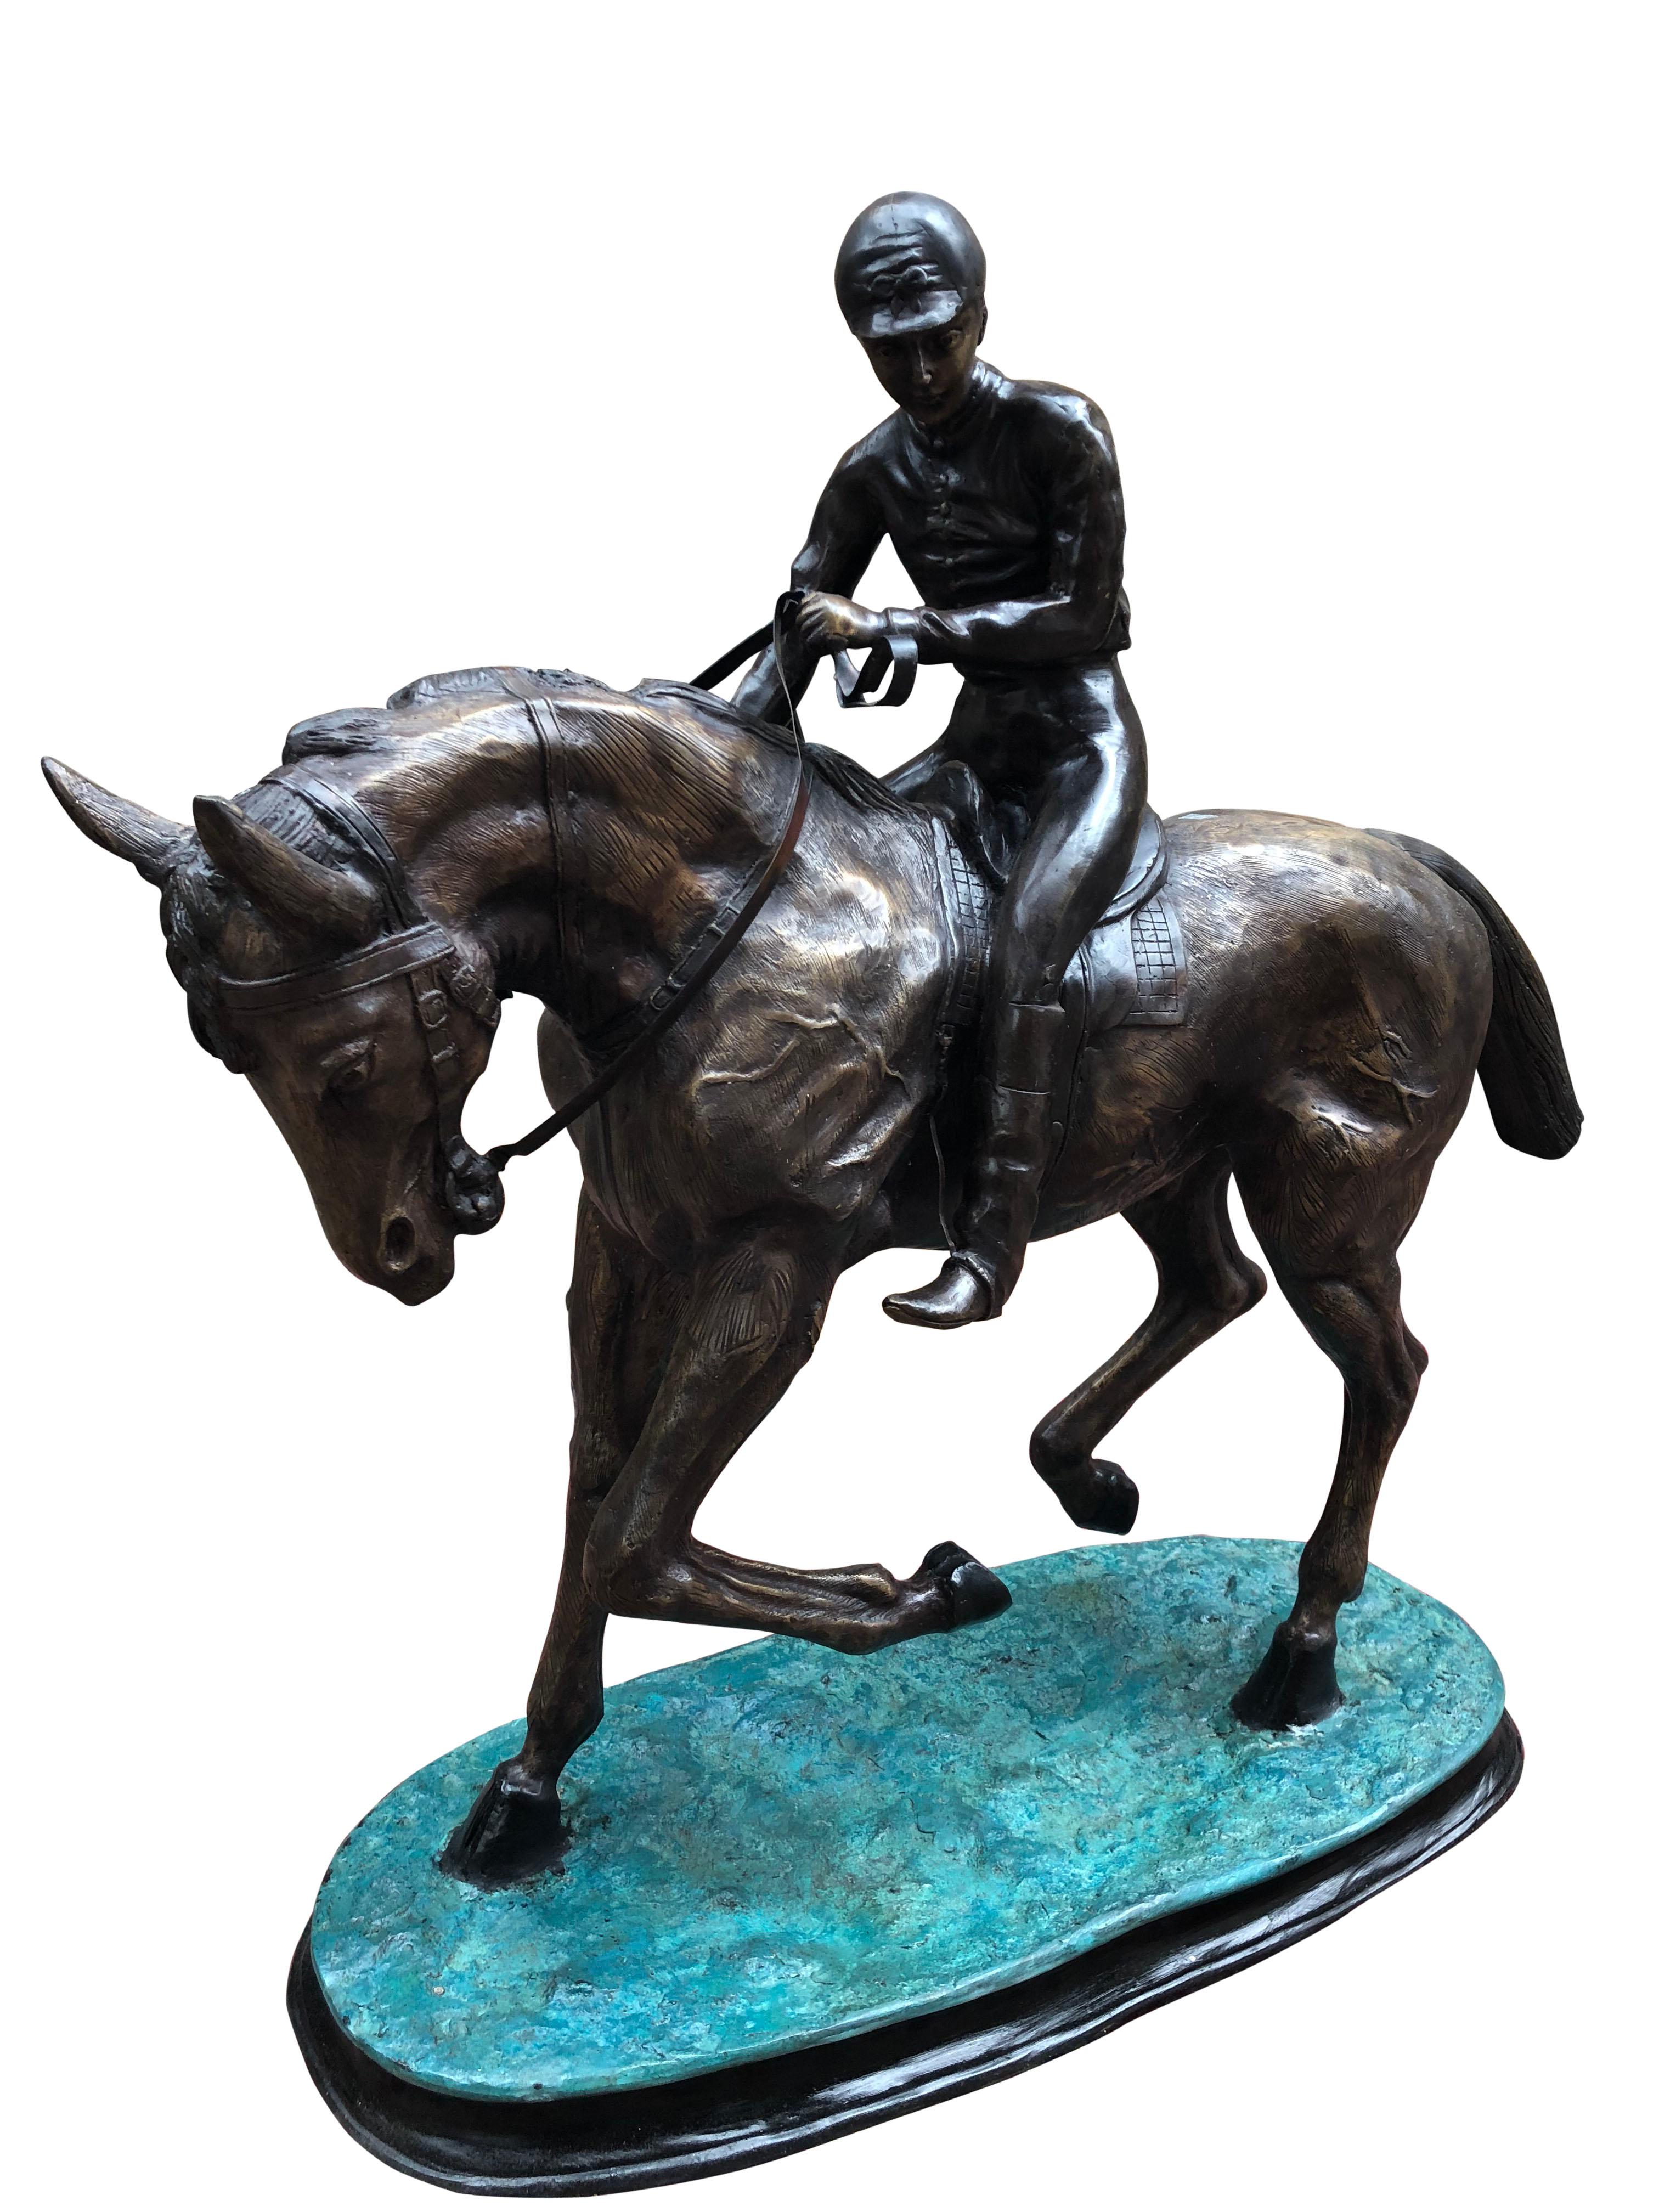 A gorgeous French bronze horse and jockey statue, made from bronze, 20th century. Believed to be a recast from the original by French artist Mene. Mene was famous for his studies of animals, particularly horses. Stands in at just under 3 feet tall